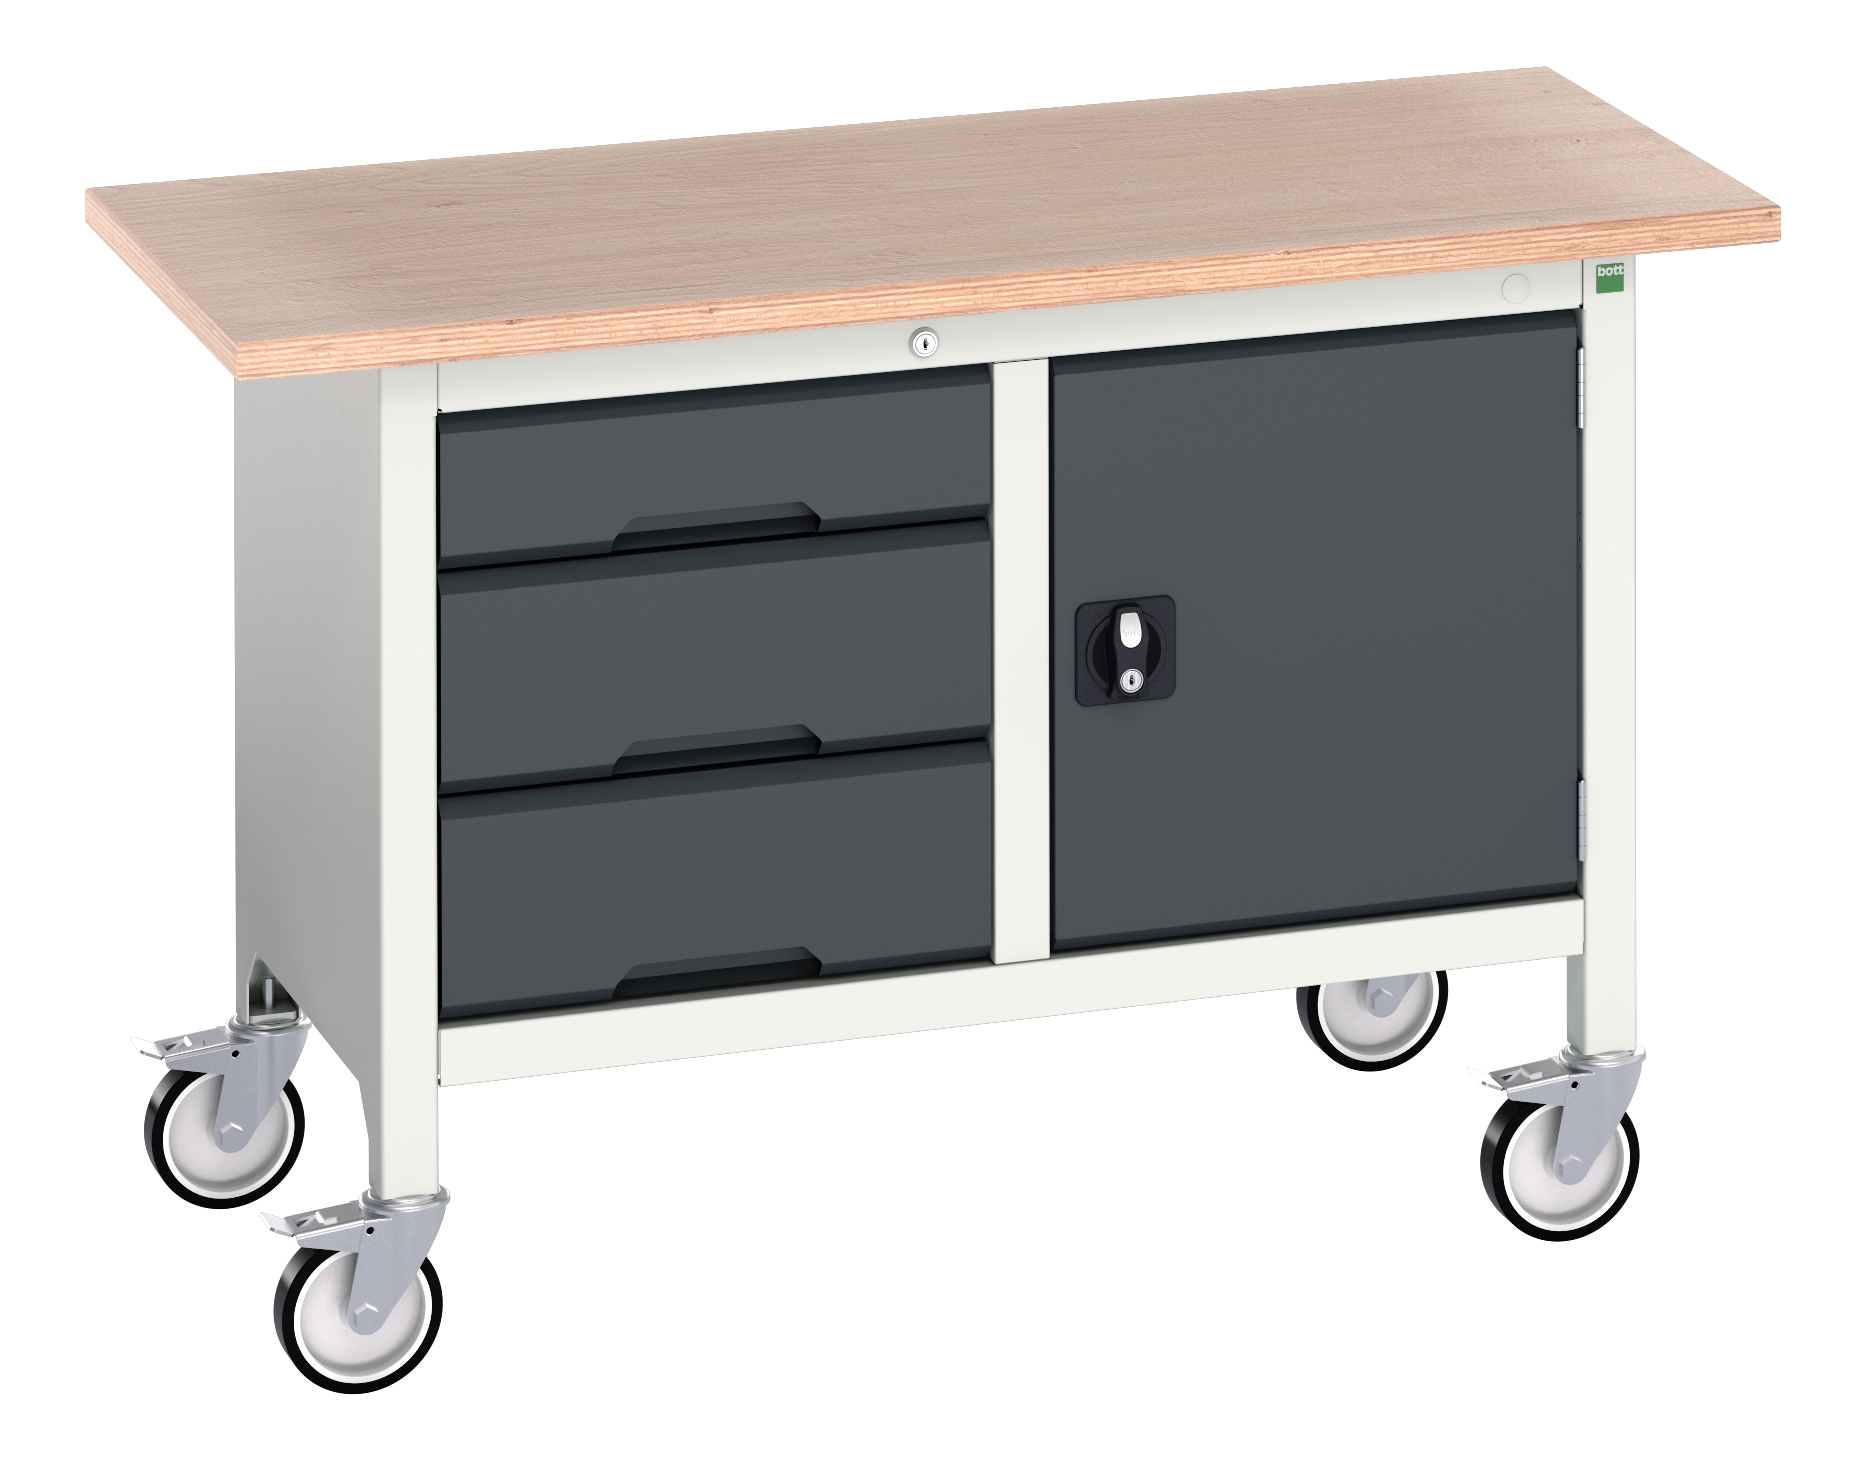 Bott Verso Mobile Storage Bench With 3 Drawer Cabinet / Full Cupboard - 16923203.19